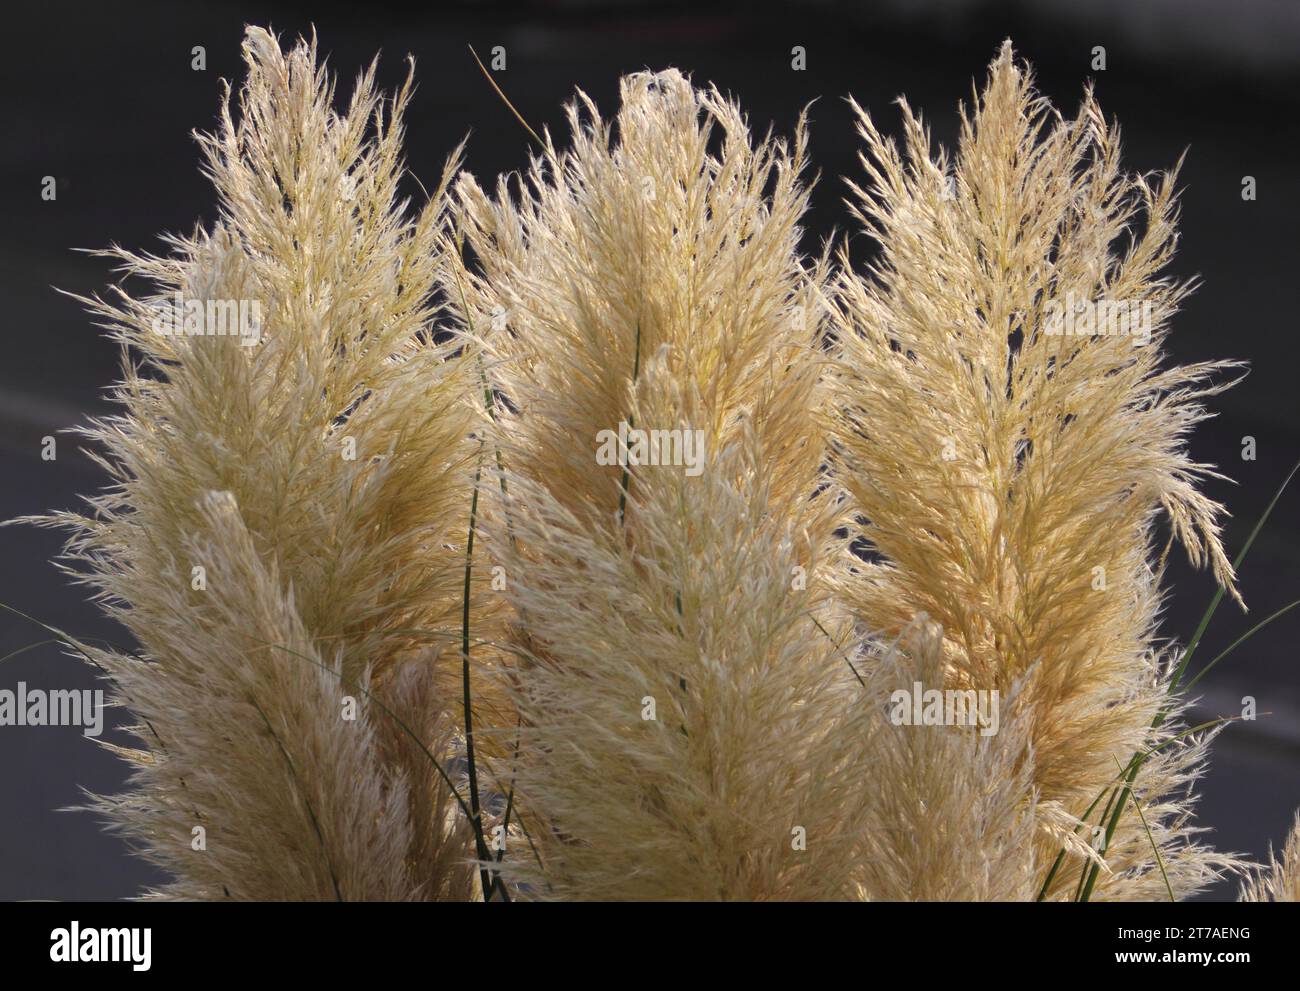 Cortaderia selloana, commonly known as pampas grass, is a flowering plant native to southern South America, including the Pampas region after which it Stock Photo